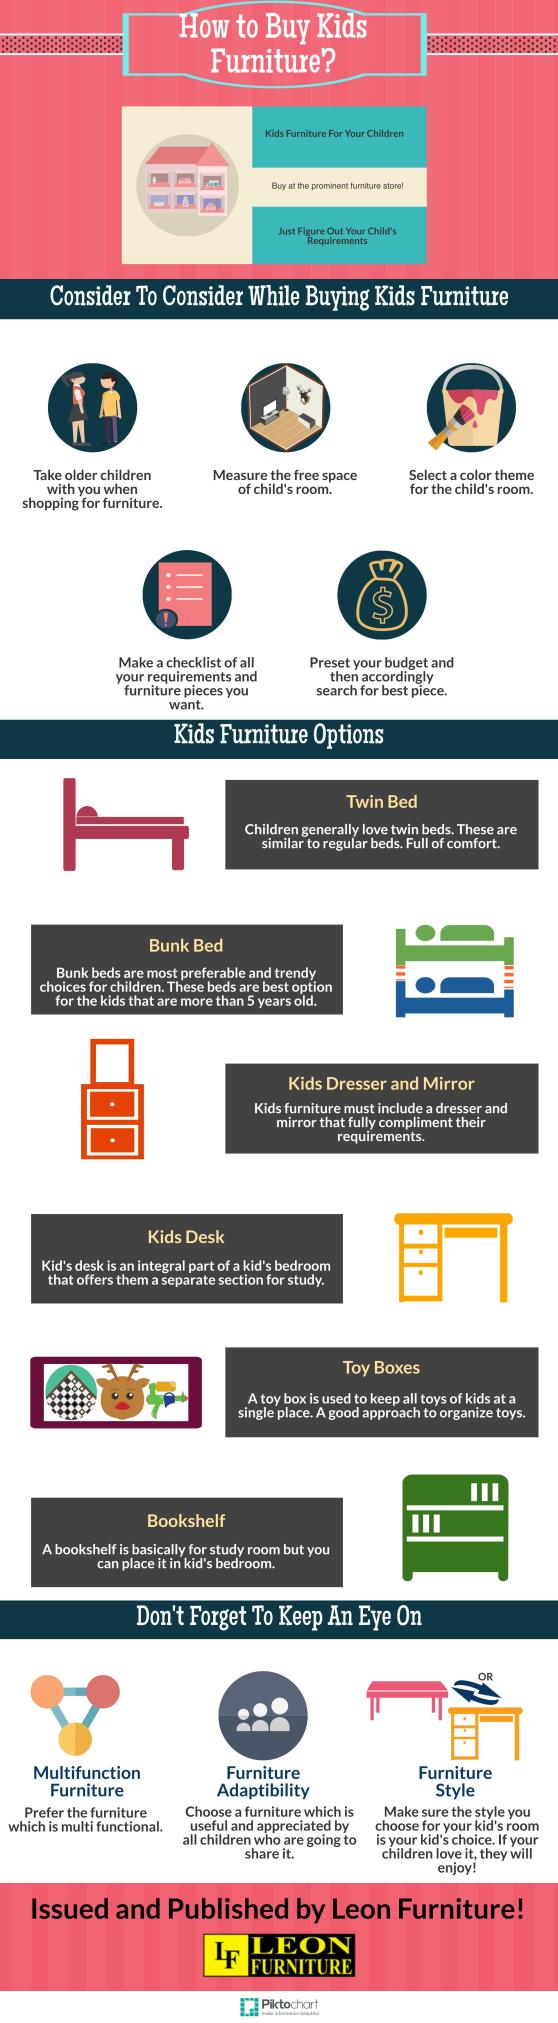 How to Buy Kids Furniture